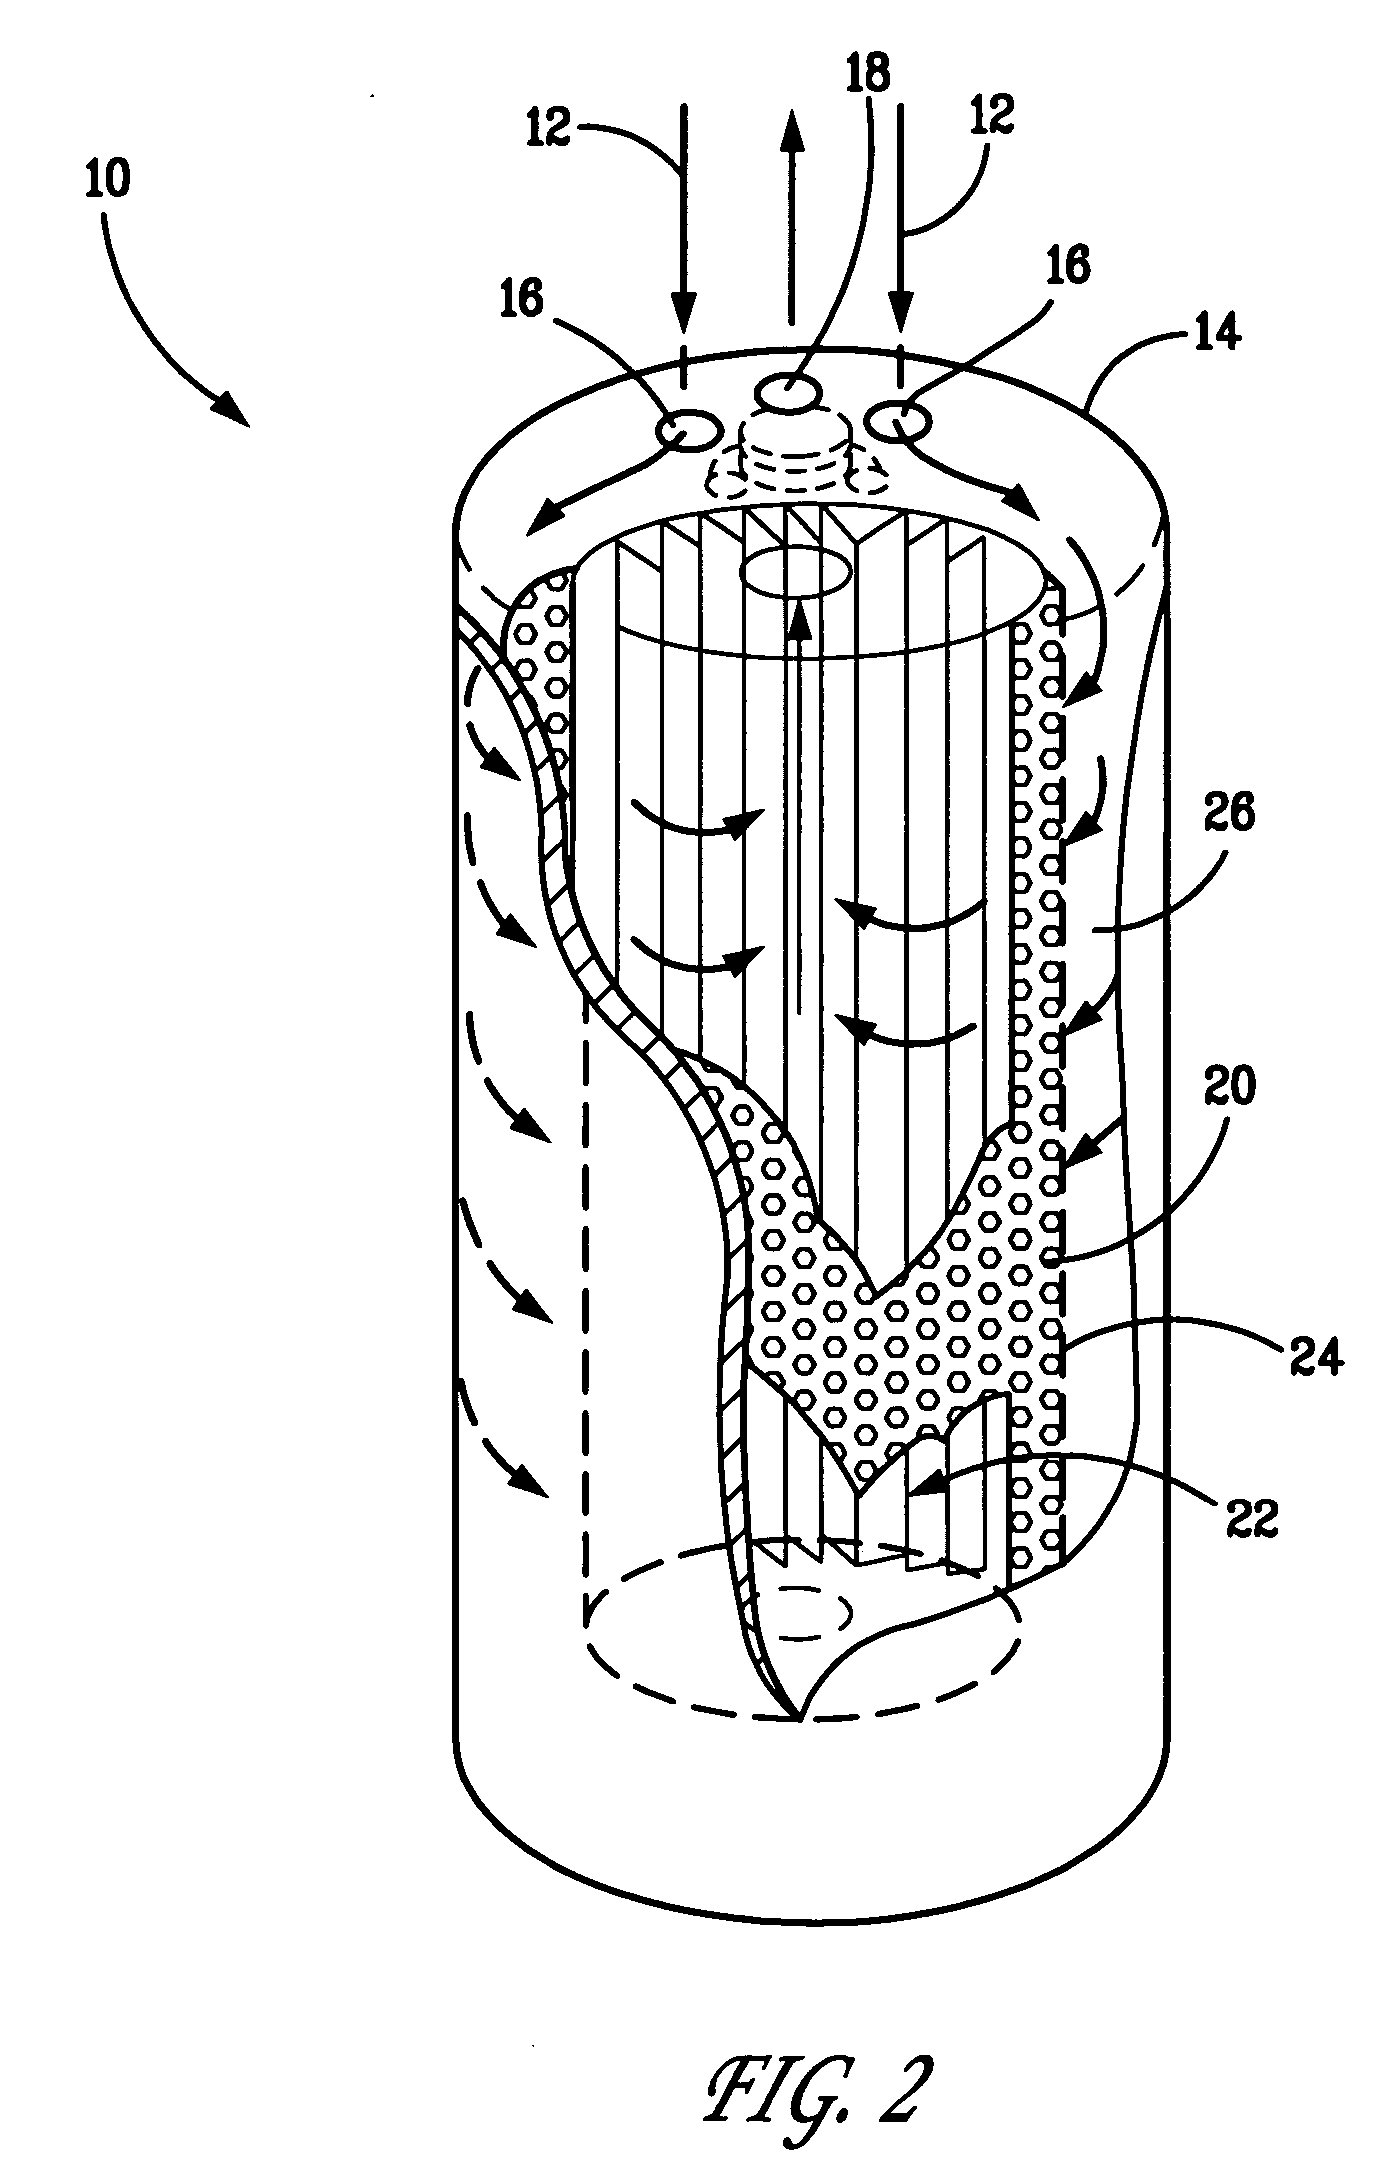 Materials, filters, and systems for immobilizing combustion by-products and controlling lubricant viscosity